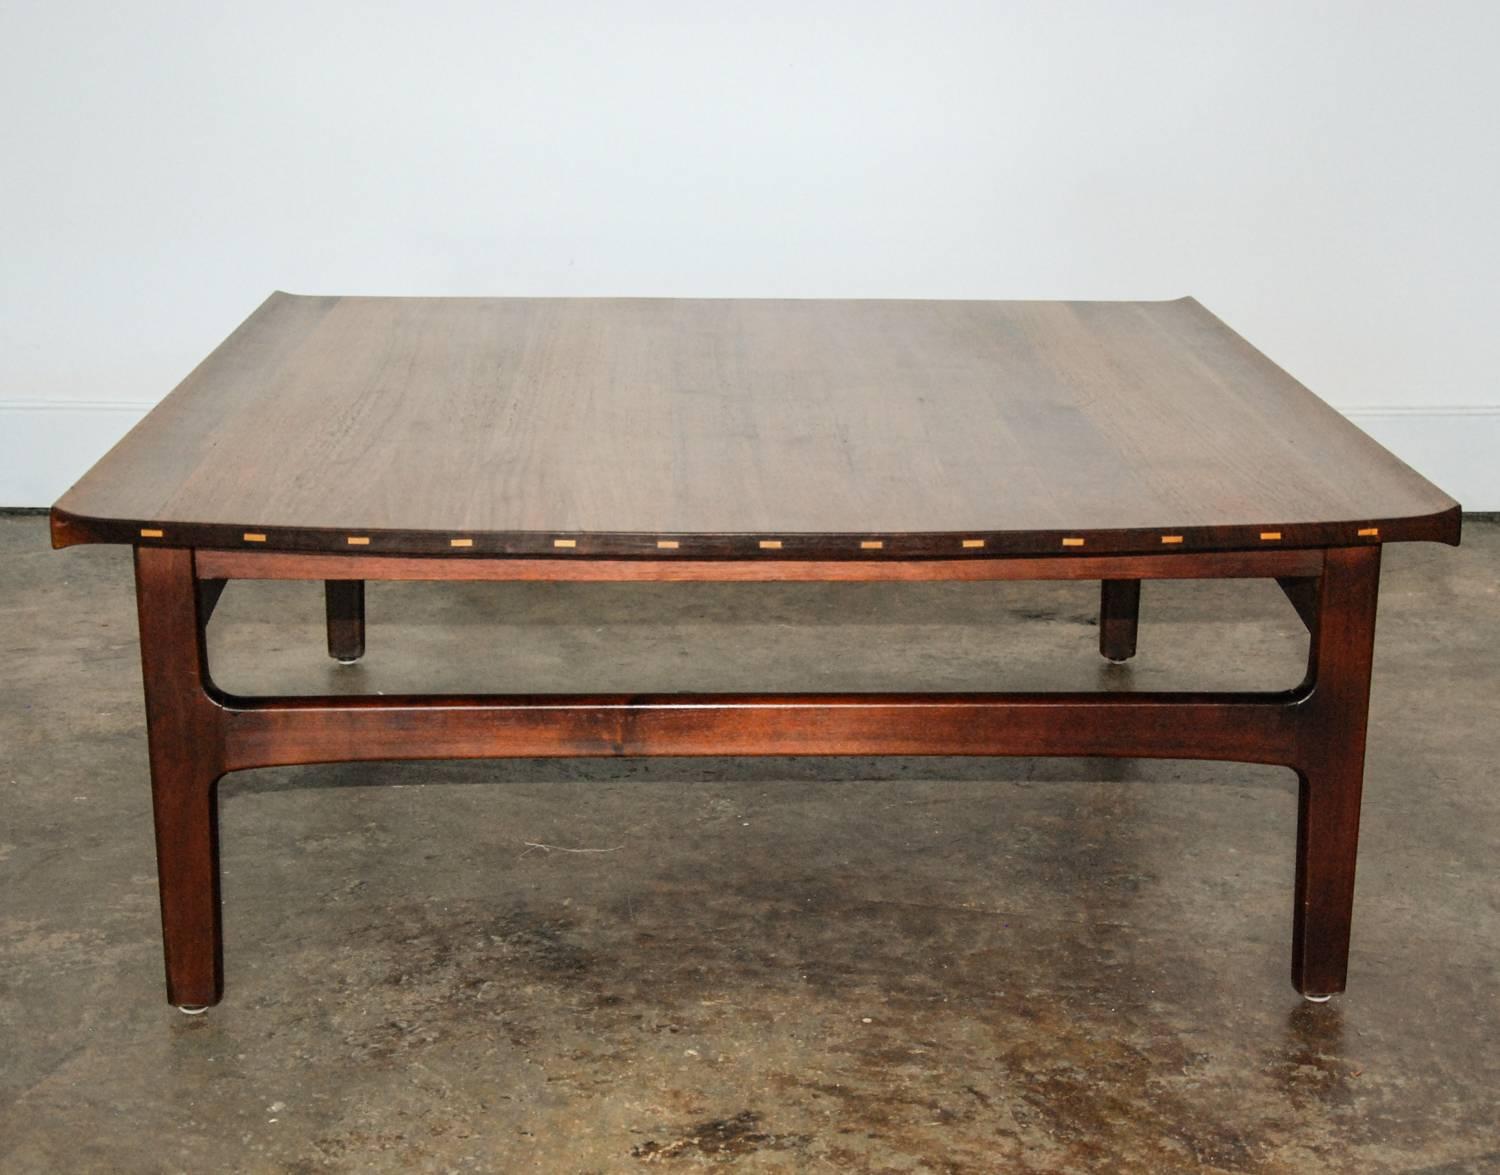 A fine Dux of Sweden richly grained teak coffee table of mortise and tenon construction with incised sycamore detailing on the top edge.  The upturned top and inset legs hint towards an Asian aesthetic.  The underside of the table top has the